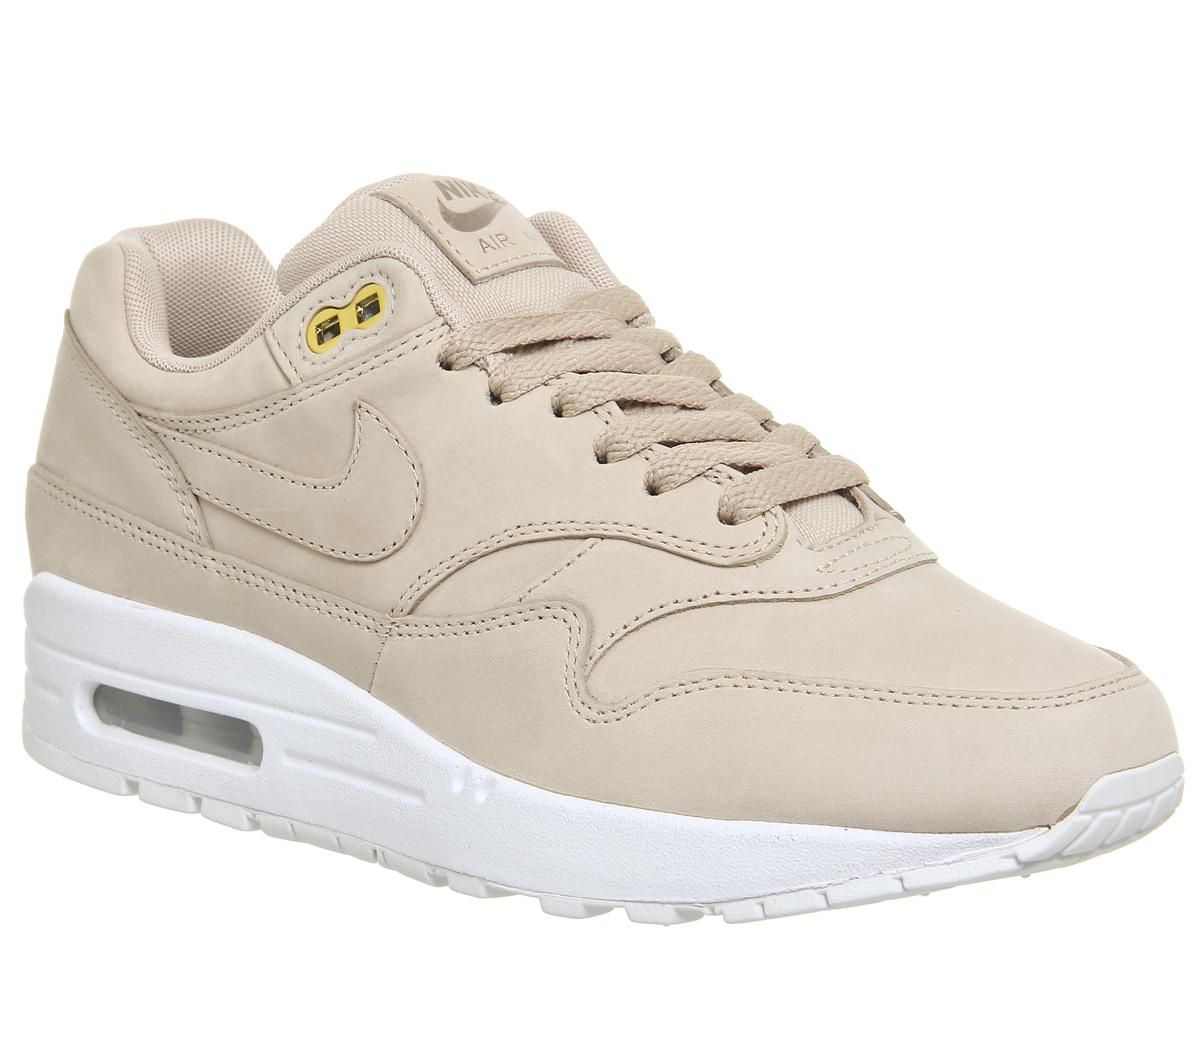 Air Max 1 Trainers